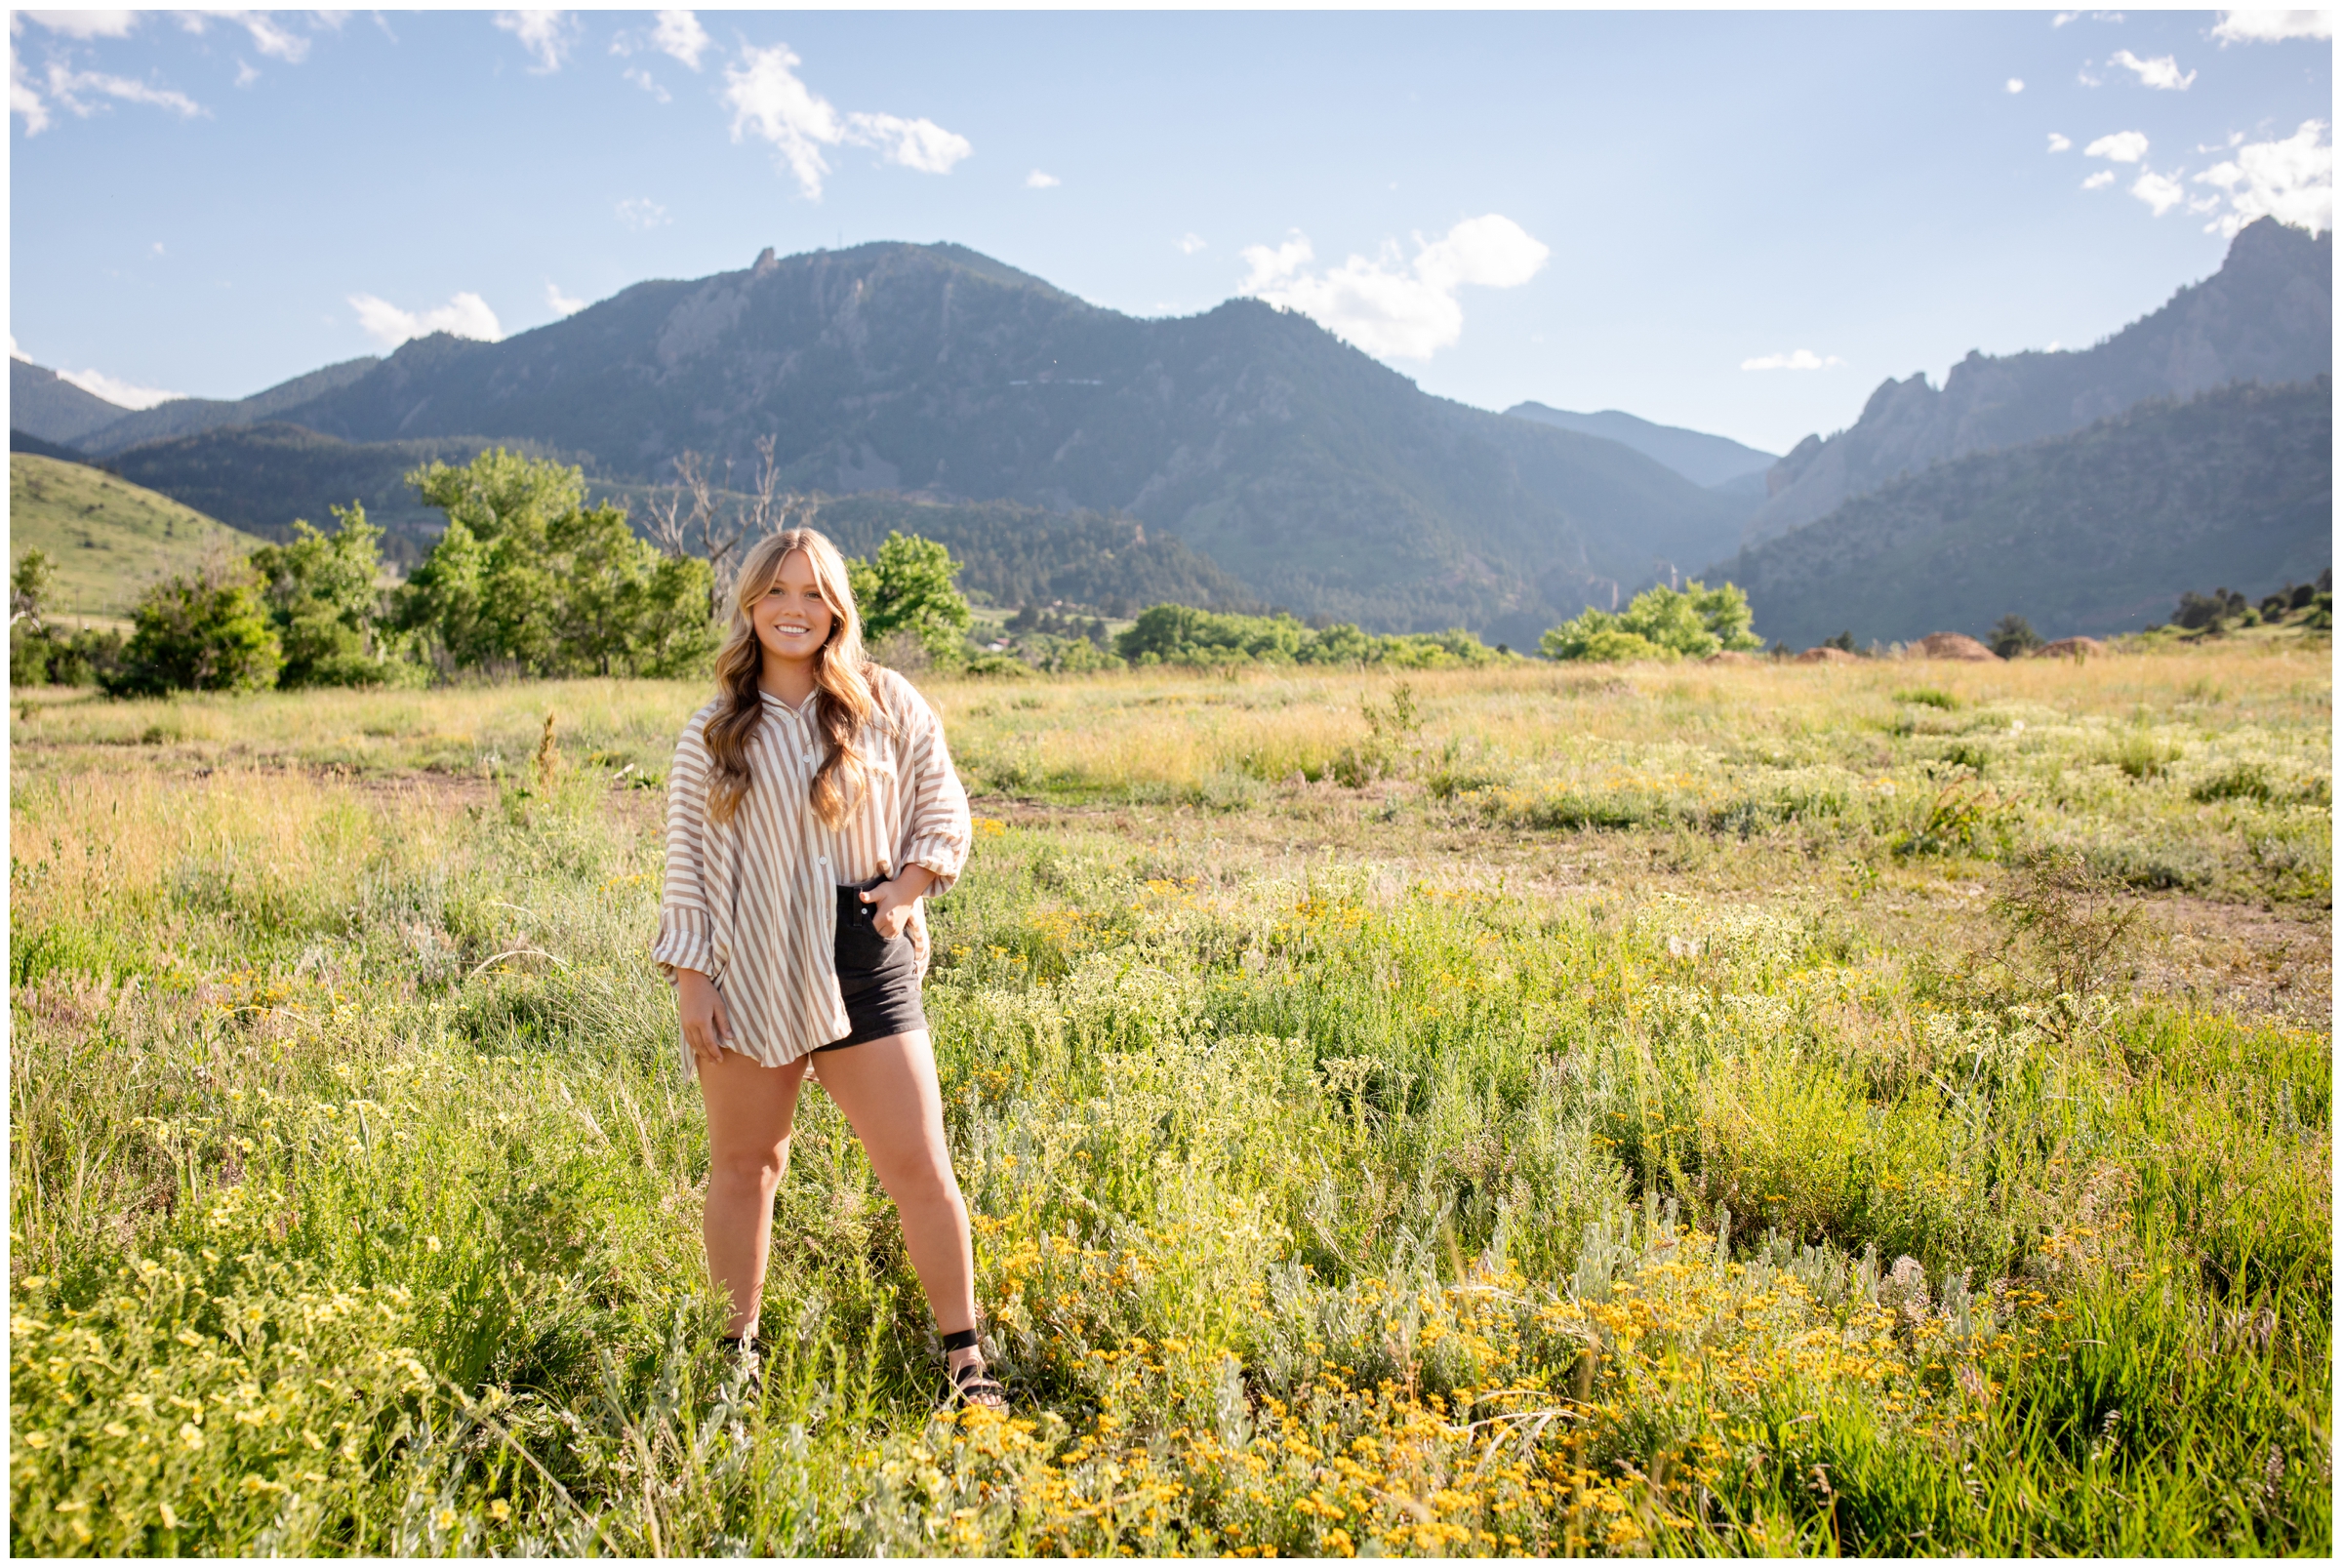 portrait photography session at the flatirons mountains of Boulder